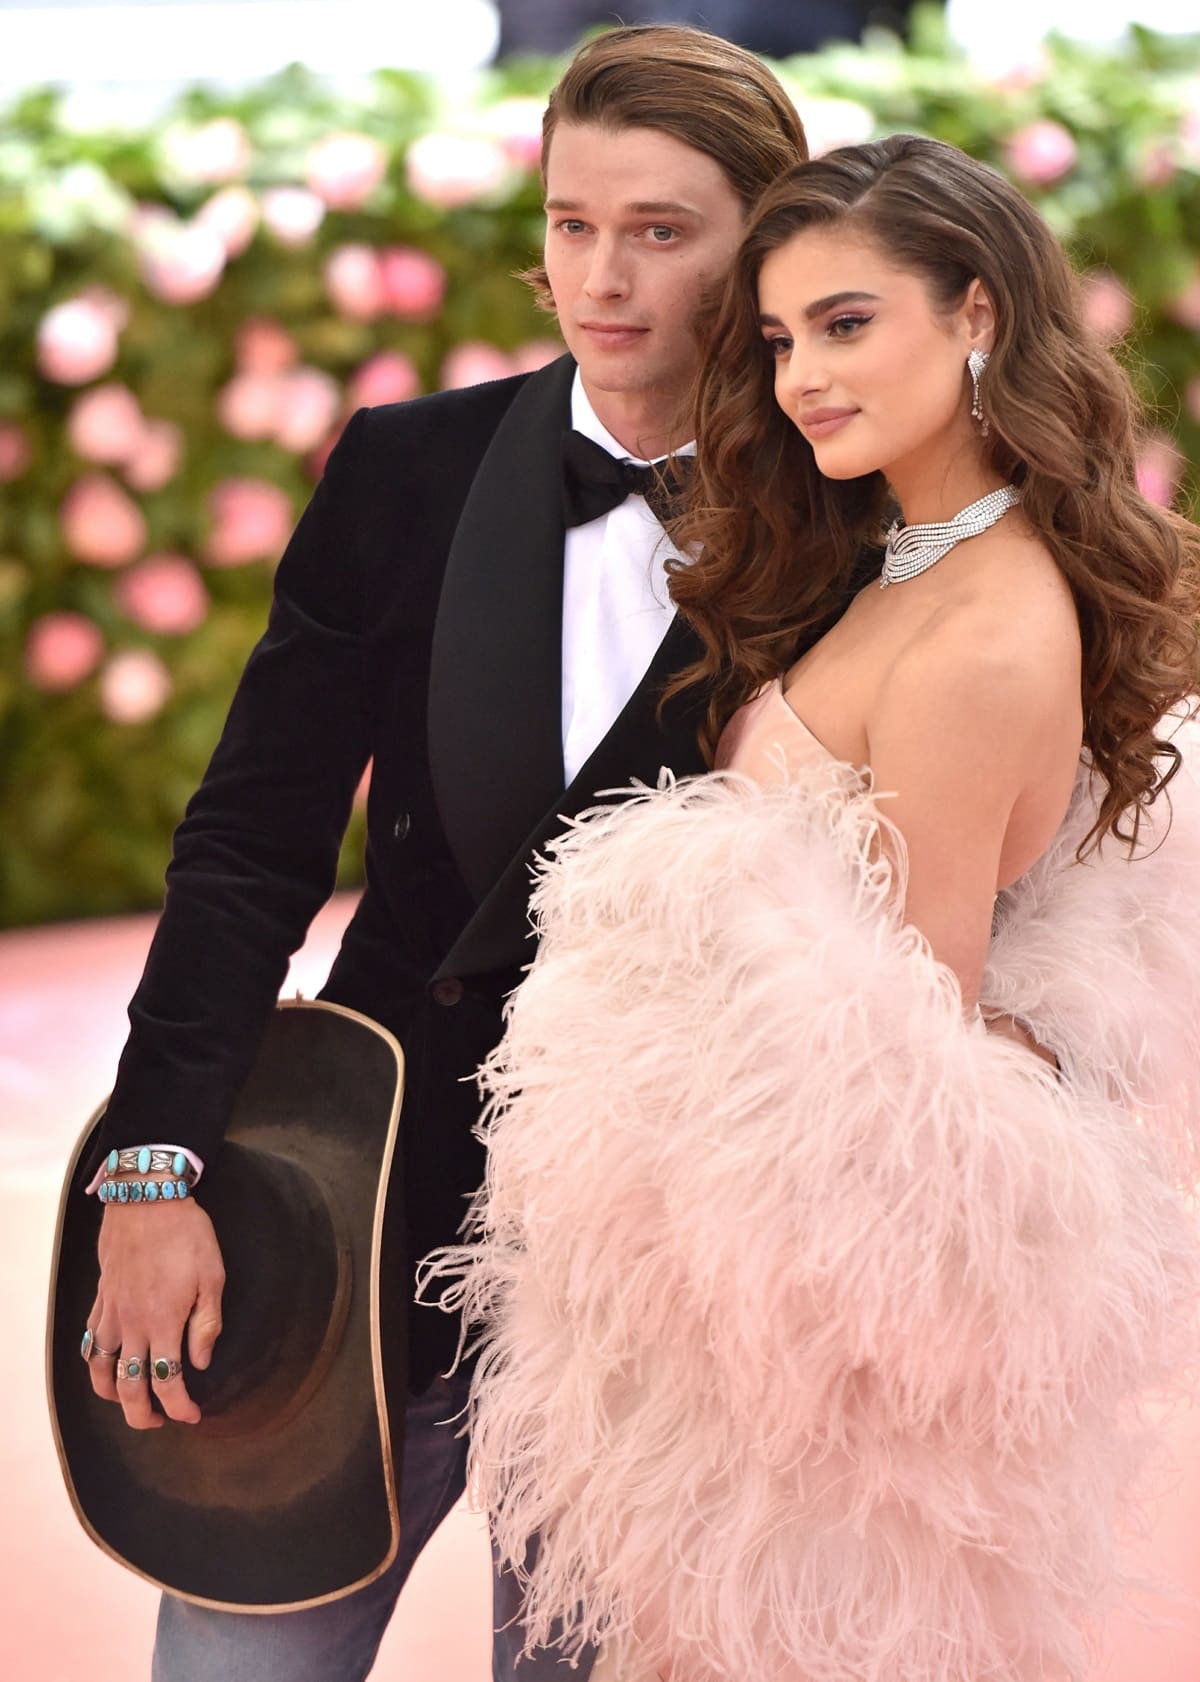 At the 2019 Met Gala "Celebrating Camp: Notes On Fashion" held at The Metropolitan Museum of Art in New York City on May 6, 2019, Patrick Schwarzenegger embraced a country-themed ensemble, whereas Taylor Hill elegantly evoked old-Hollywood allure in a satin slip dress, complemented by a blush feather boa and mesmerizing diamond adornments